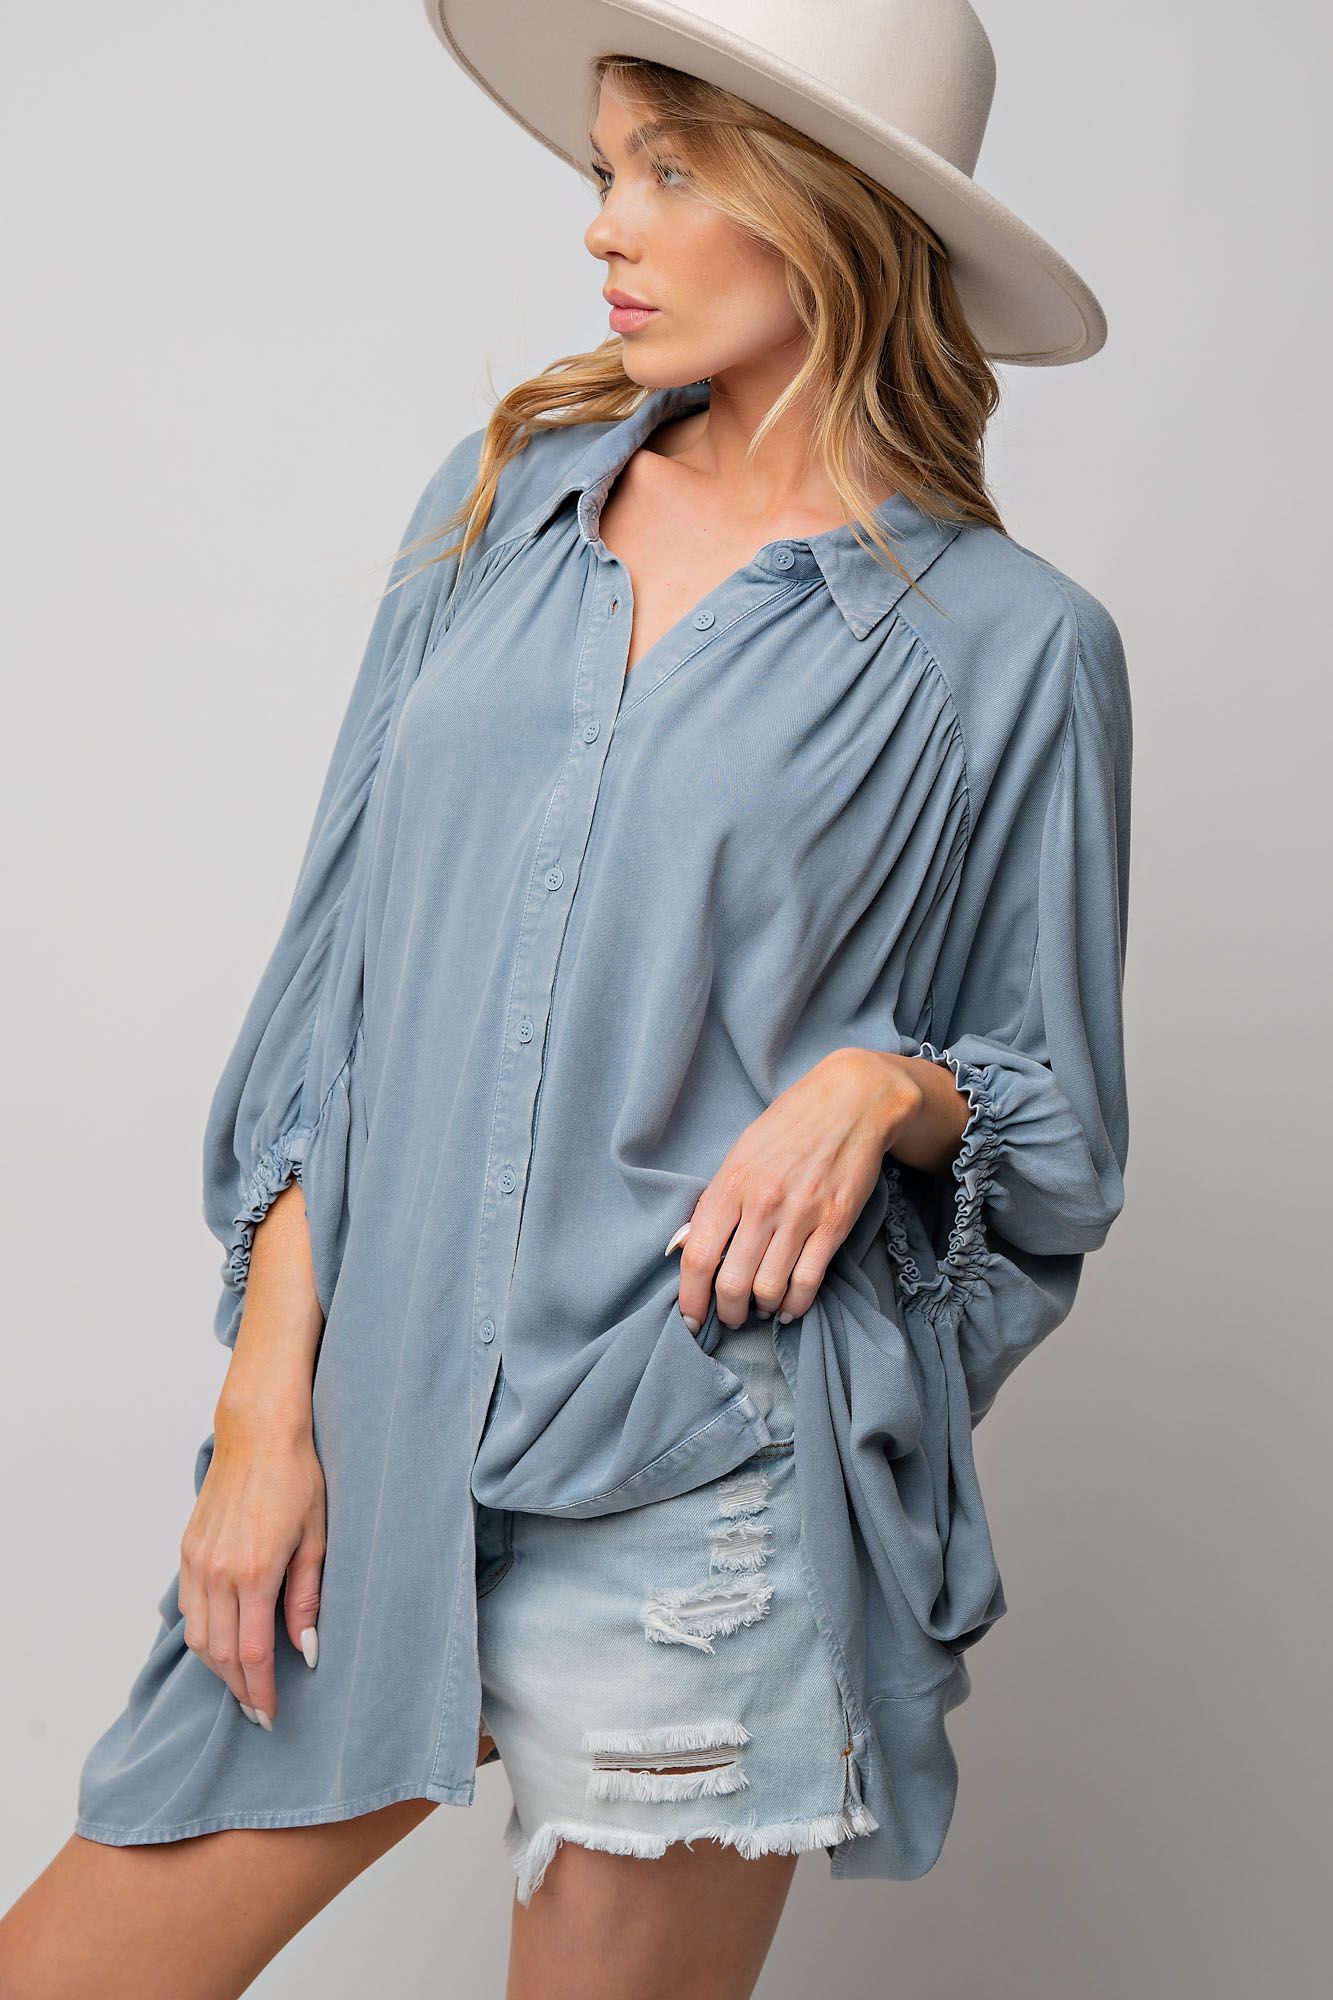 Easel Plus Mineral Washed Dolman Sleeve Button Down Tunic Tops